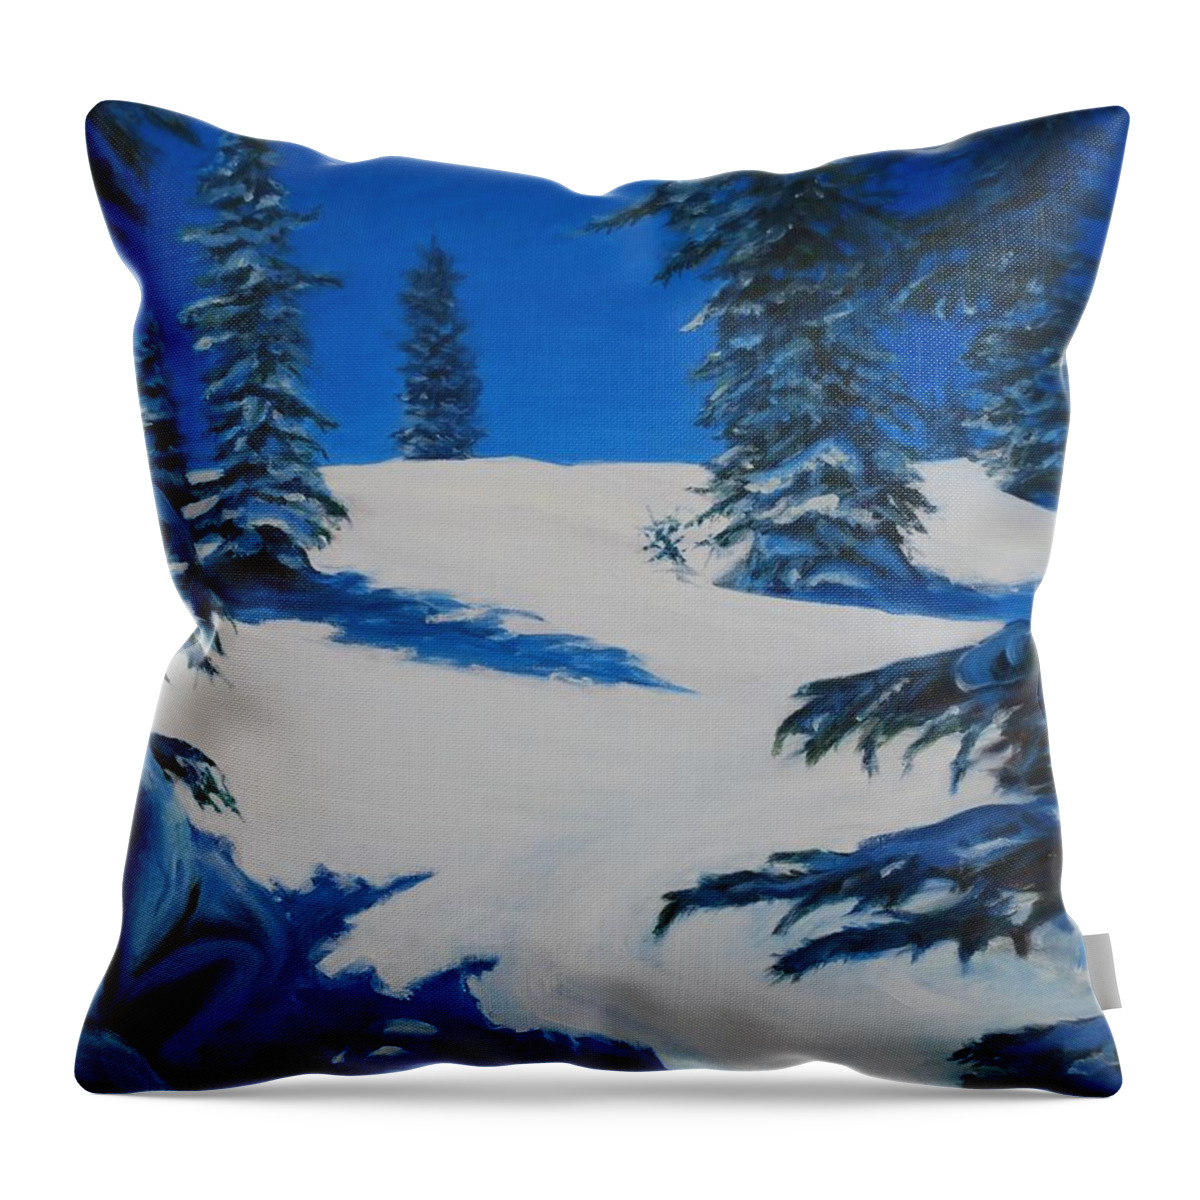 Snow Throw Pillow featuring the painting Continental Blues by Celeste Drewien